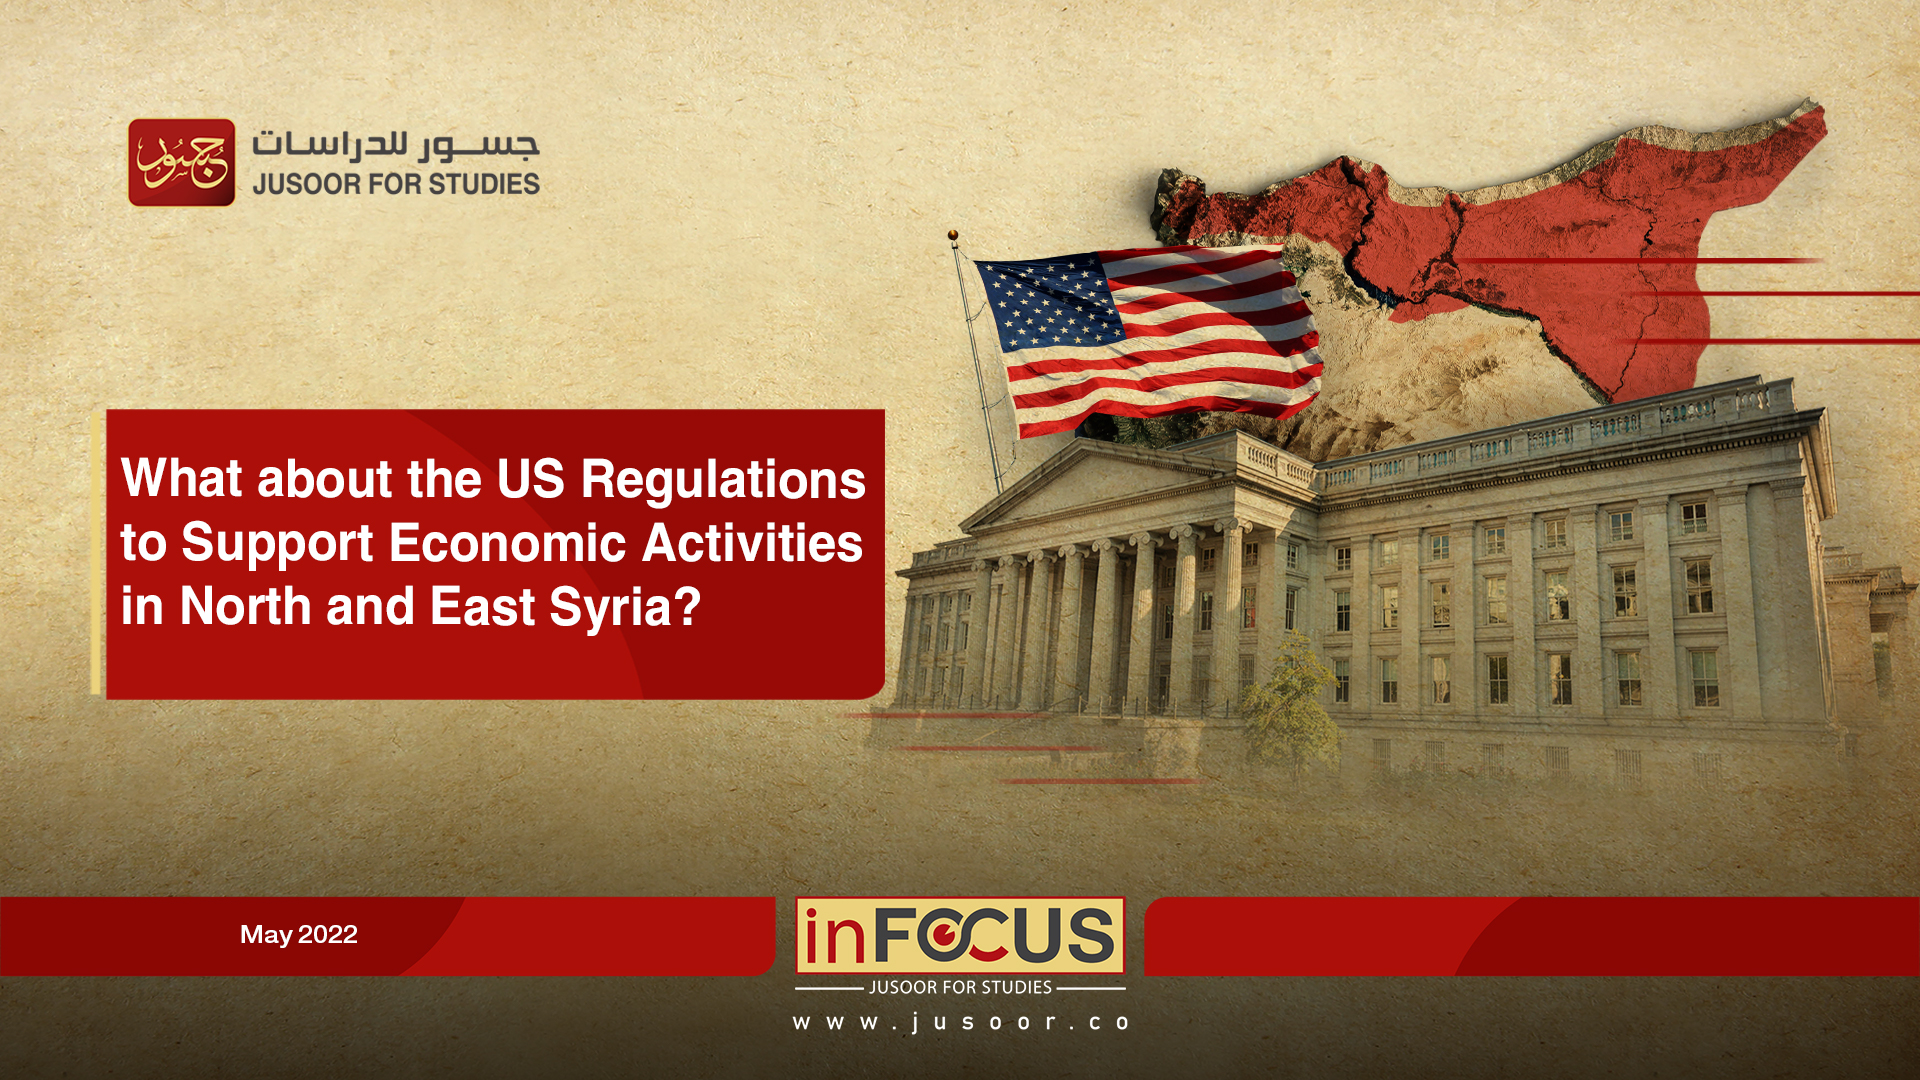 What about the US Regulations to Support Economic Activities in North and East Syria